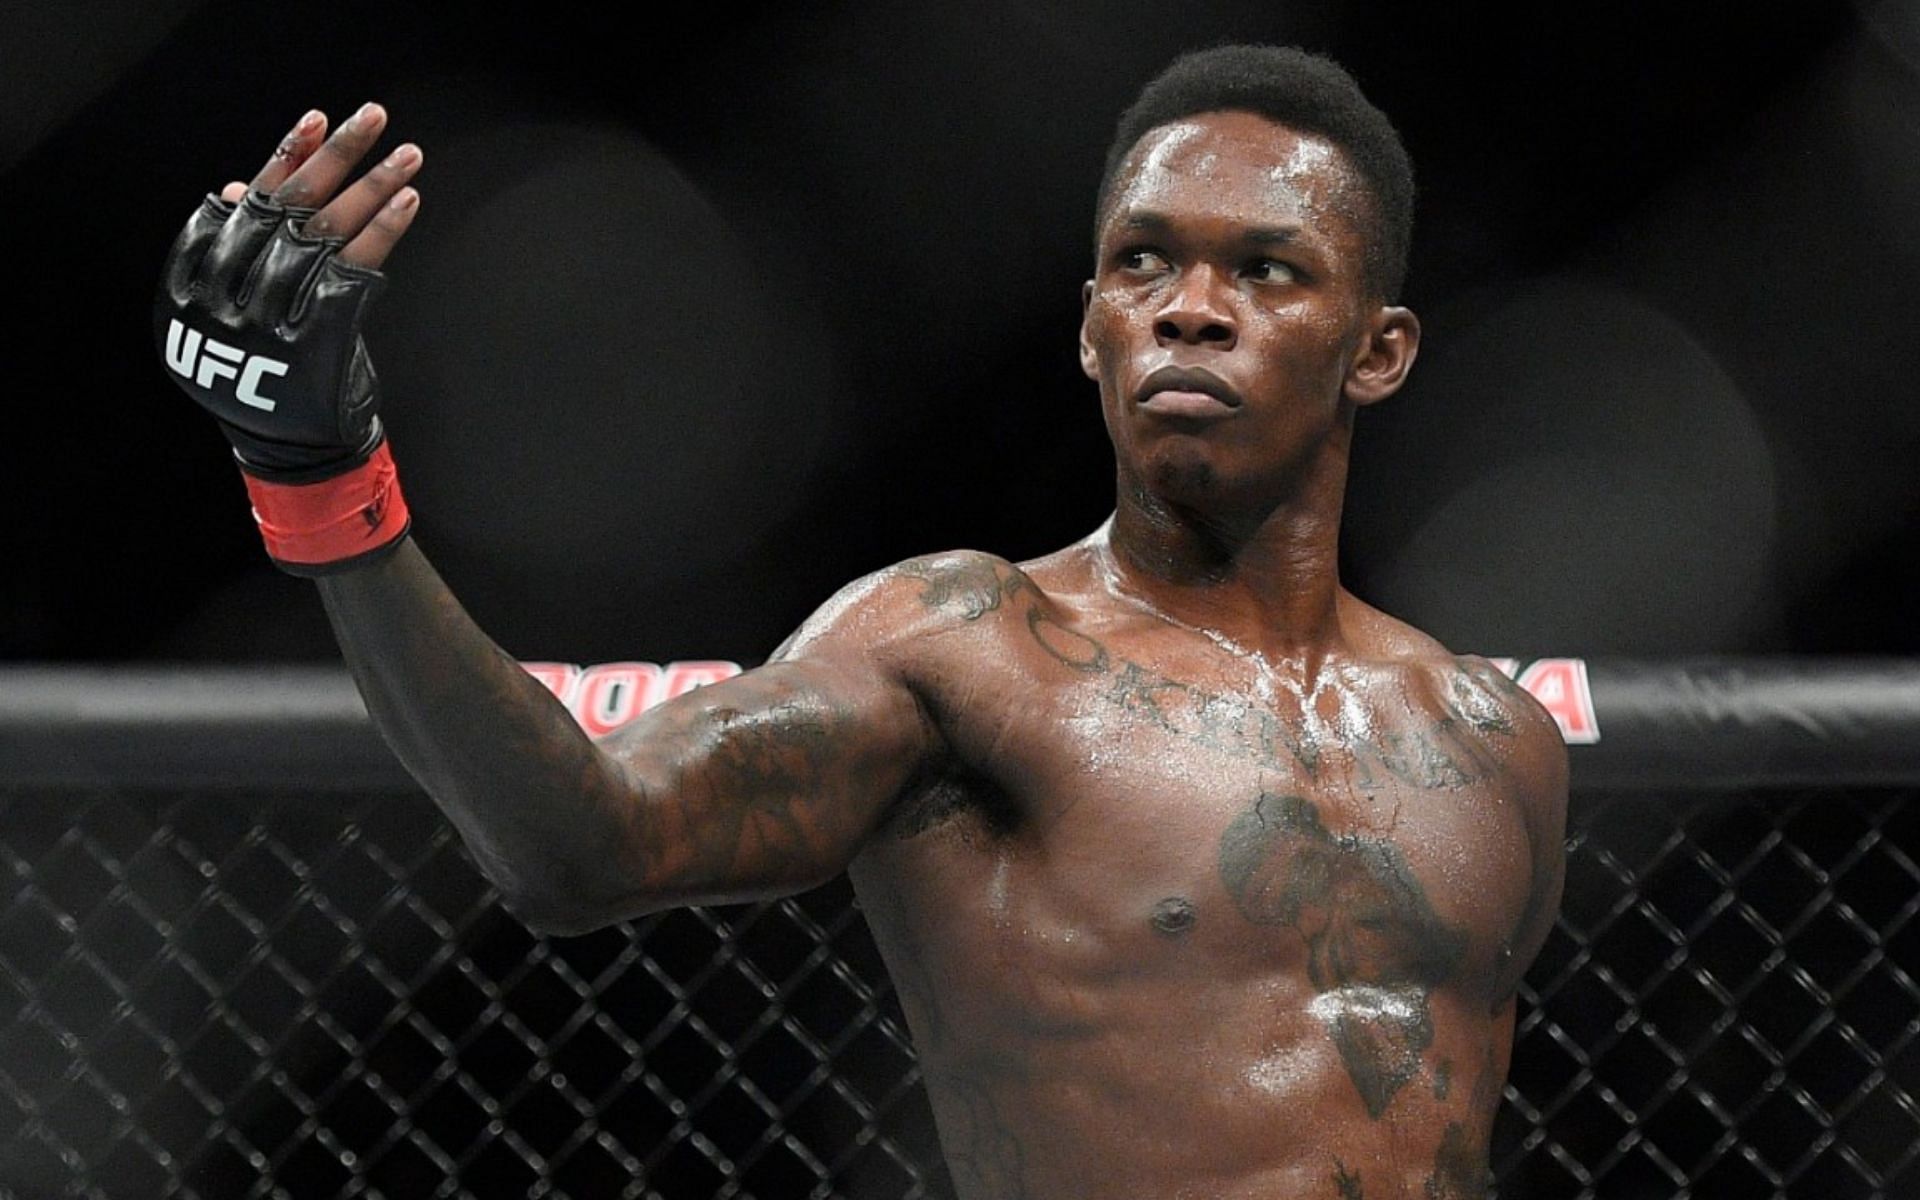 Will Israel Adesanya ever reach the same level of stardom as Conor McGregor?